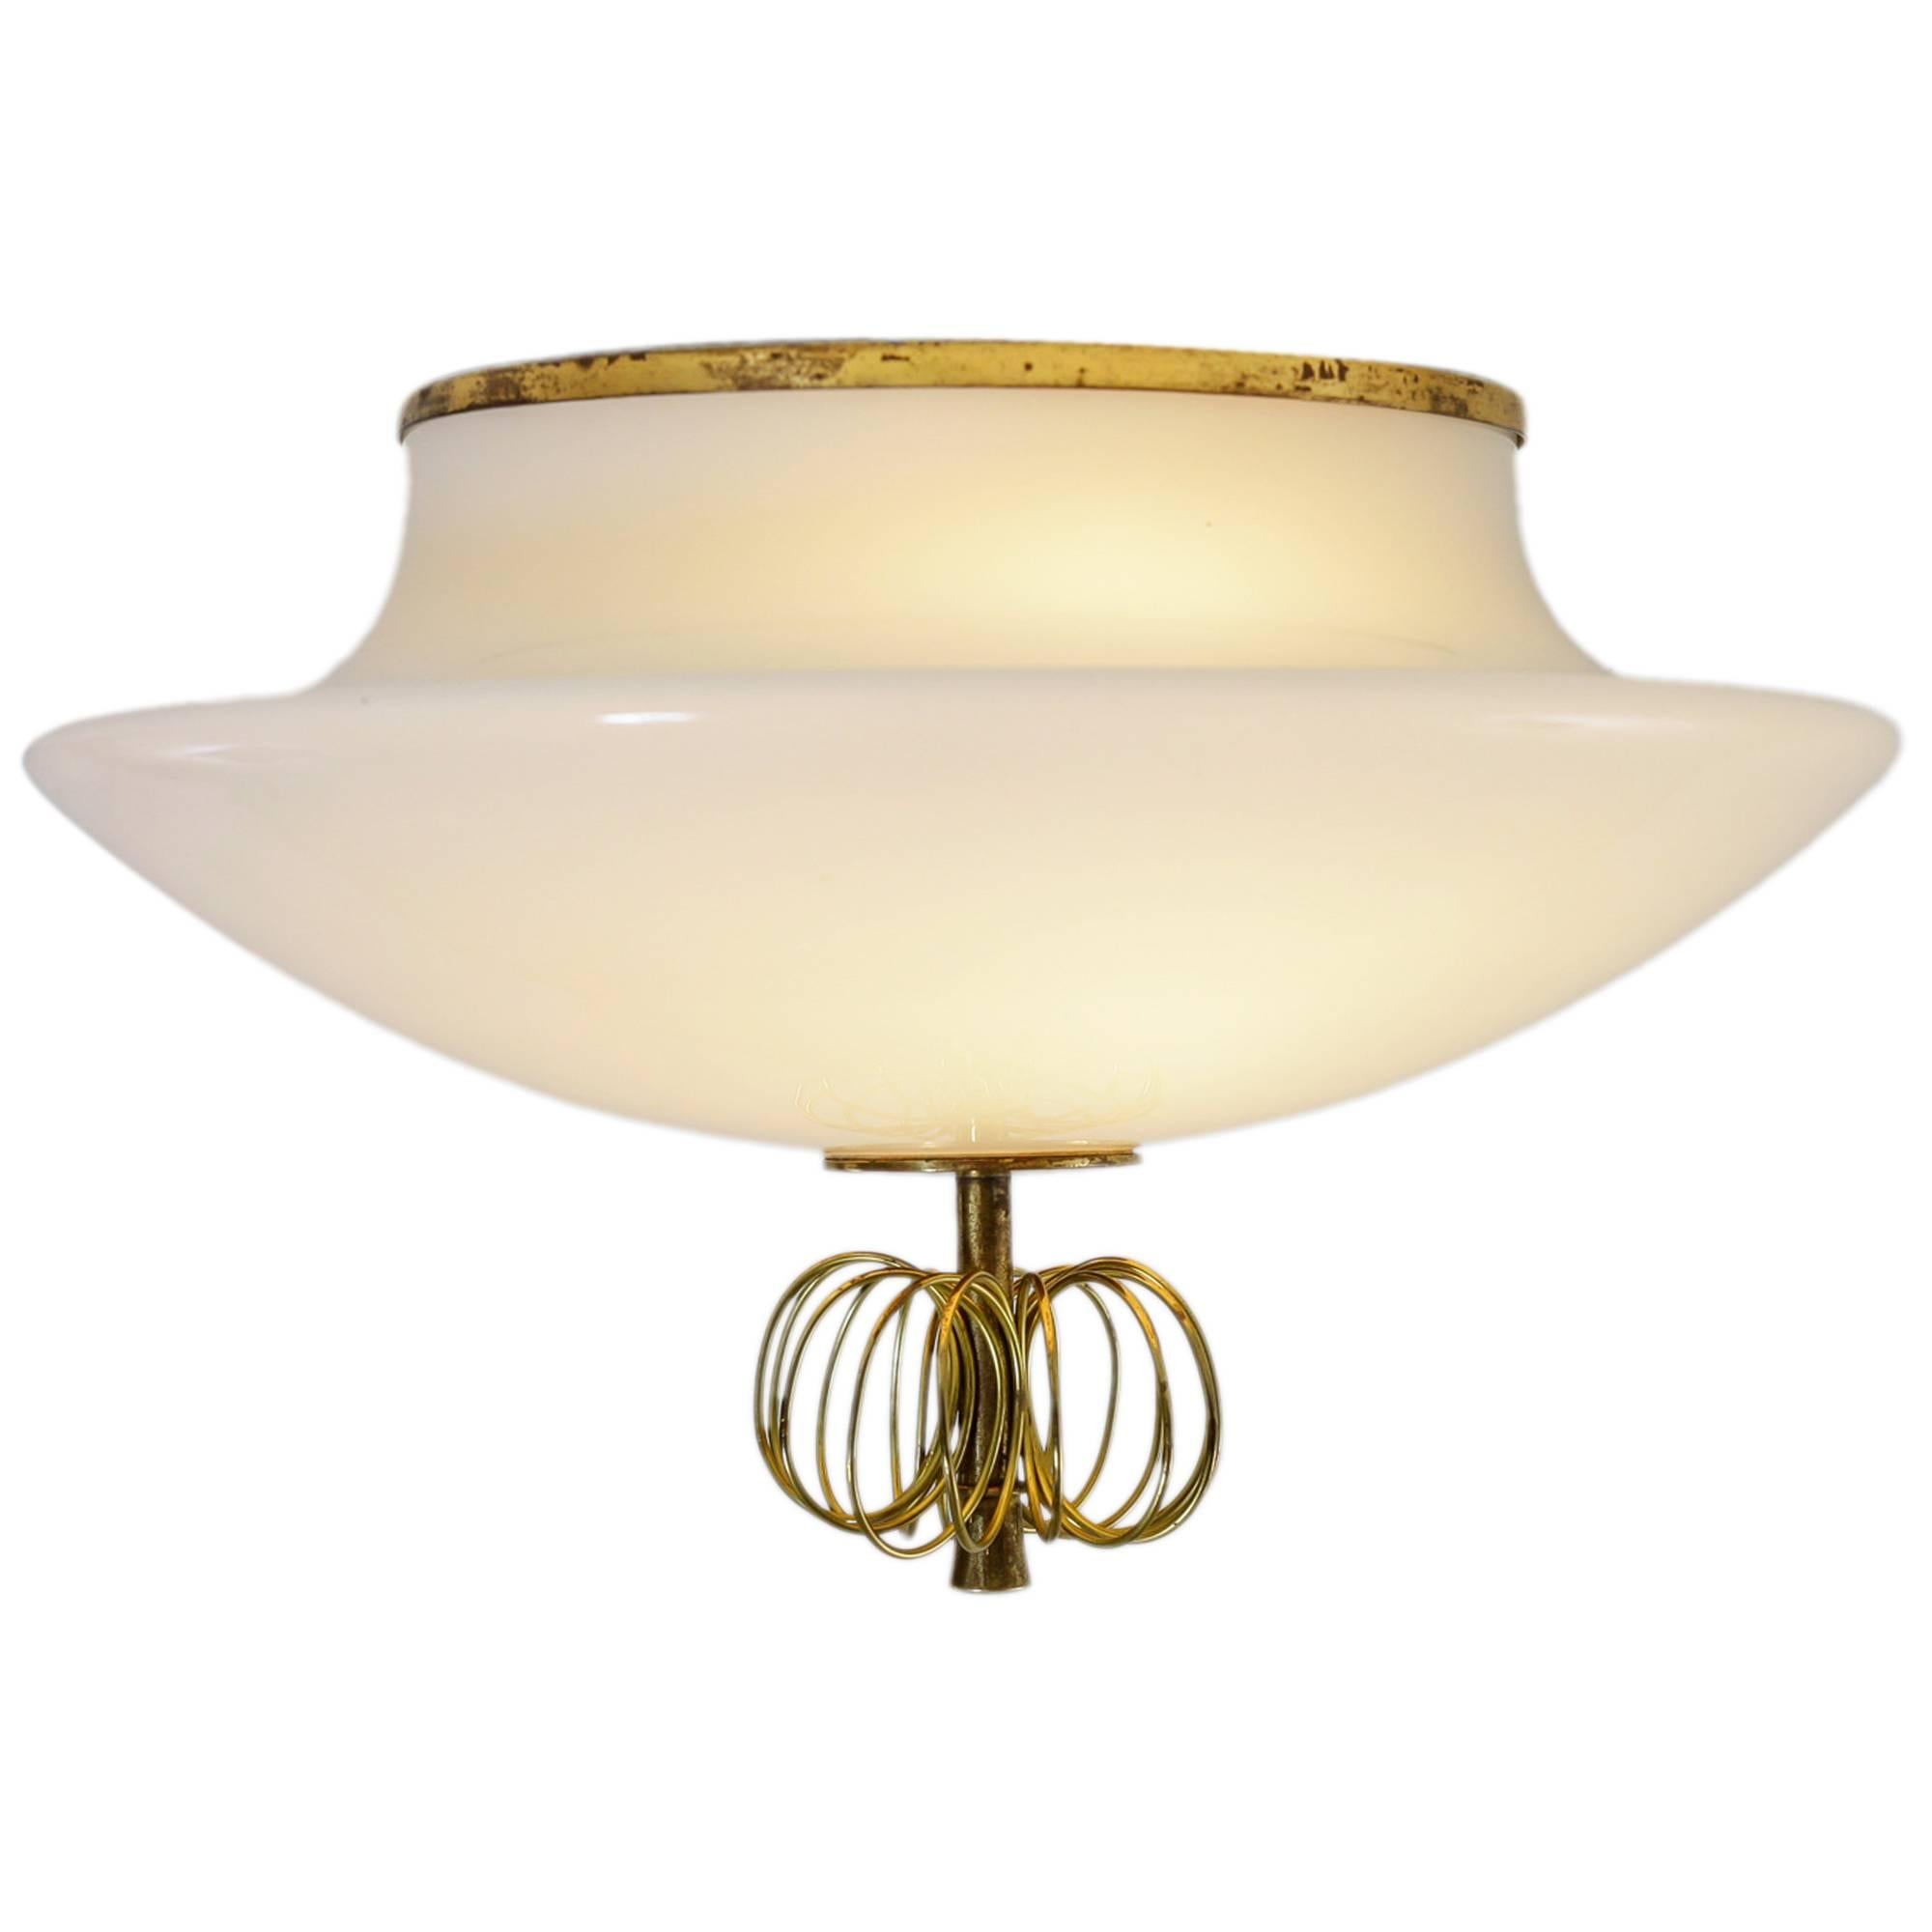 Rare Paavo Tynell ceiling lamp for Taito, Finland, 1940s For Sale